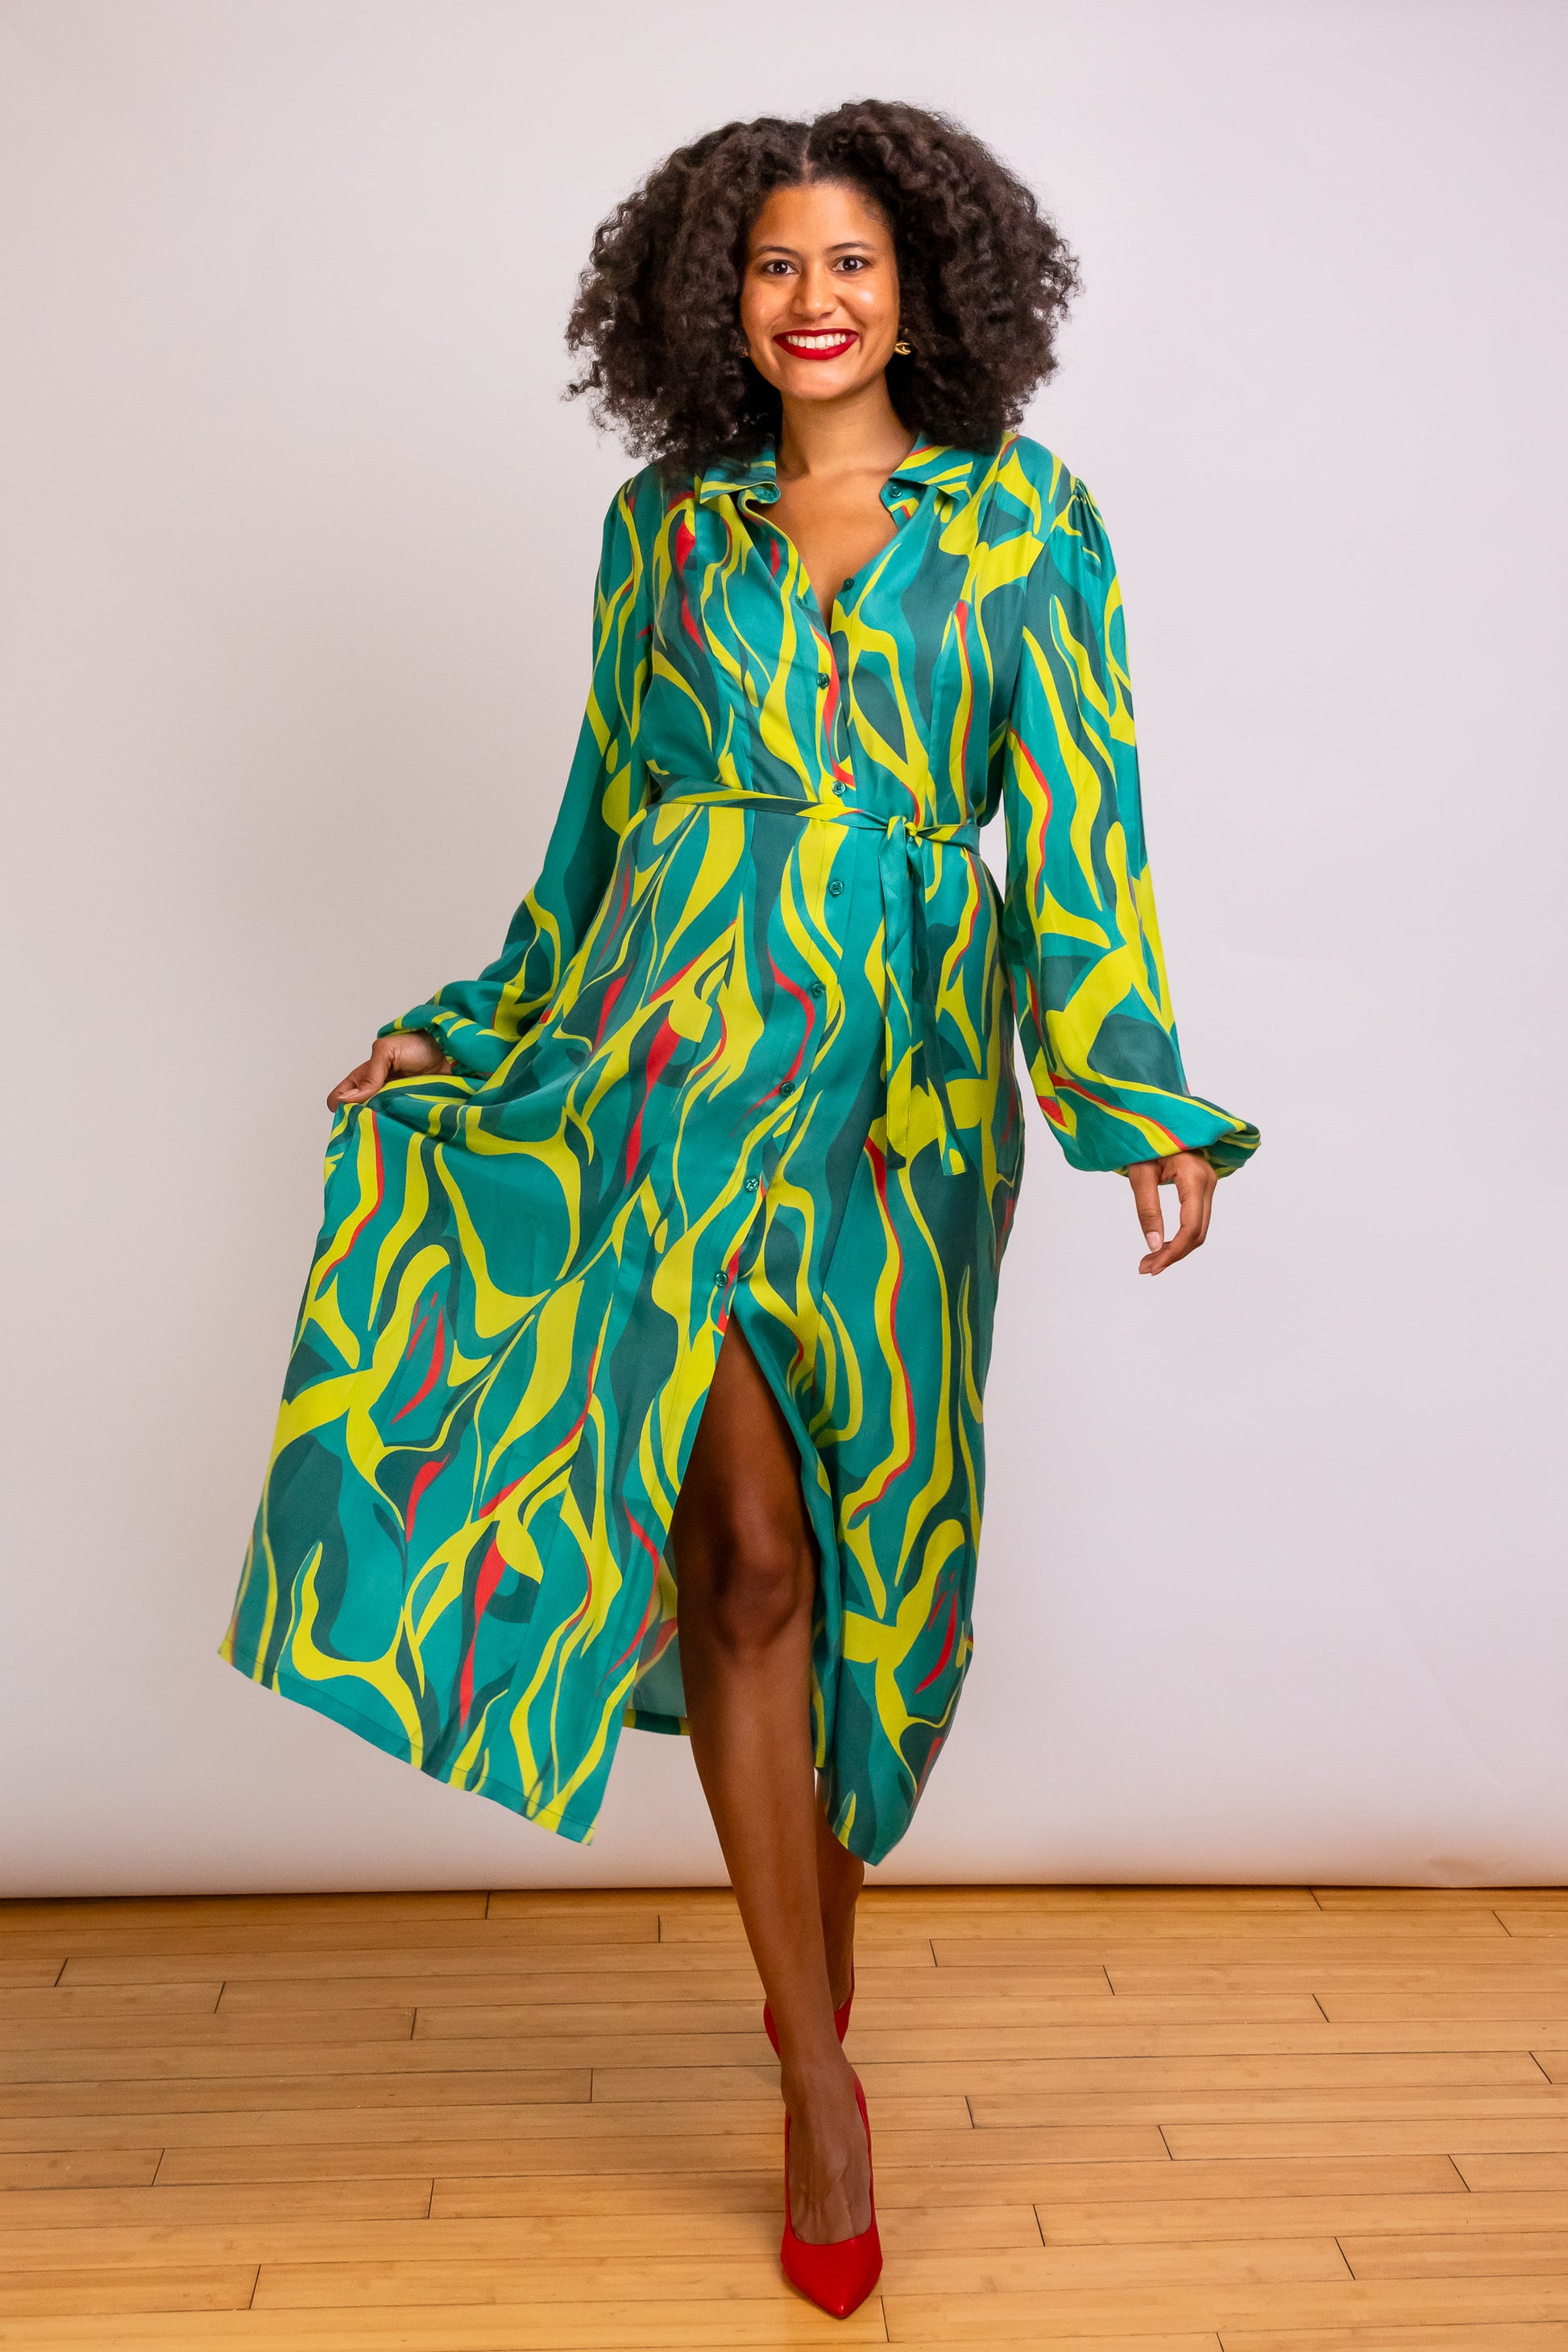 Denver Abstract Printed Midi-length Shirt Dress. Adjust the buttons for modest style or show some leg. 